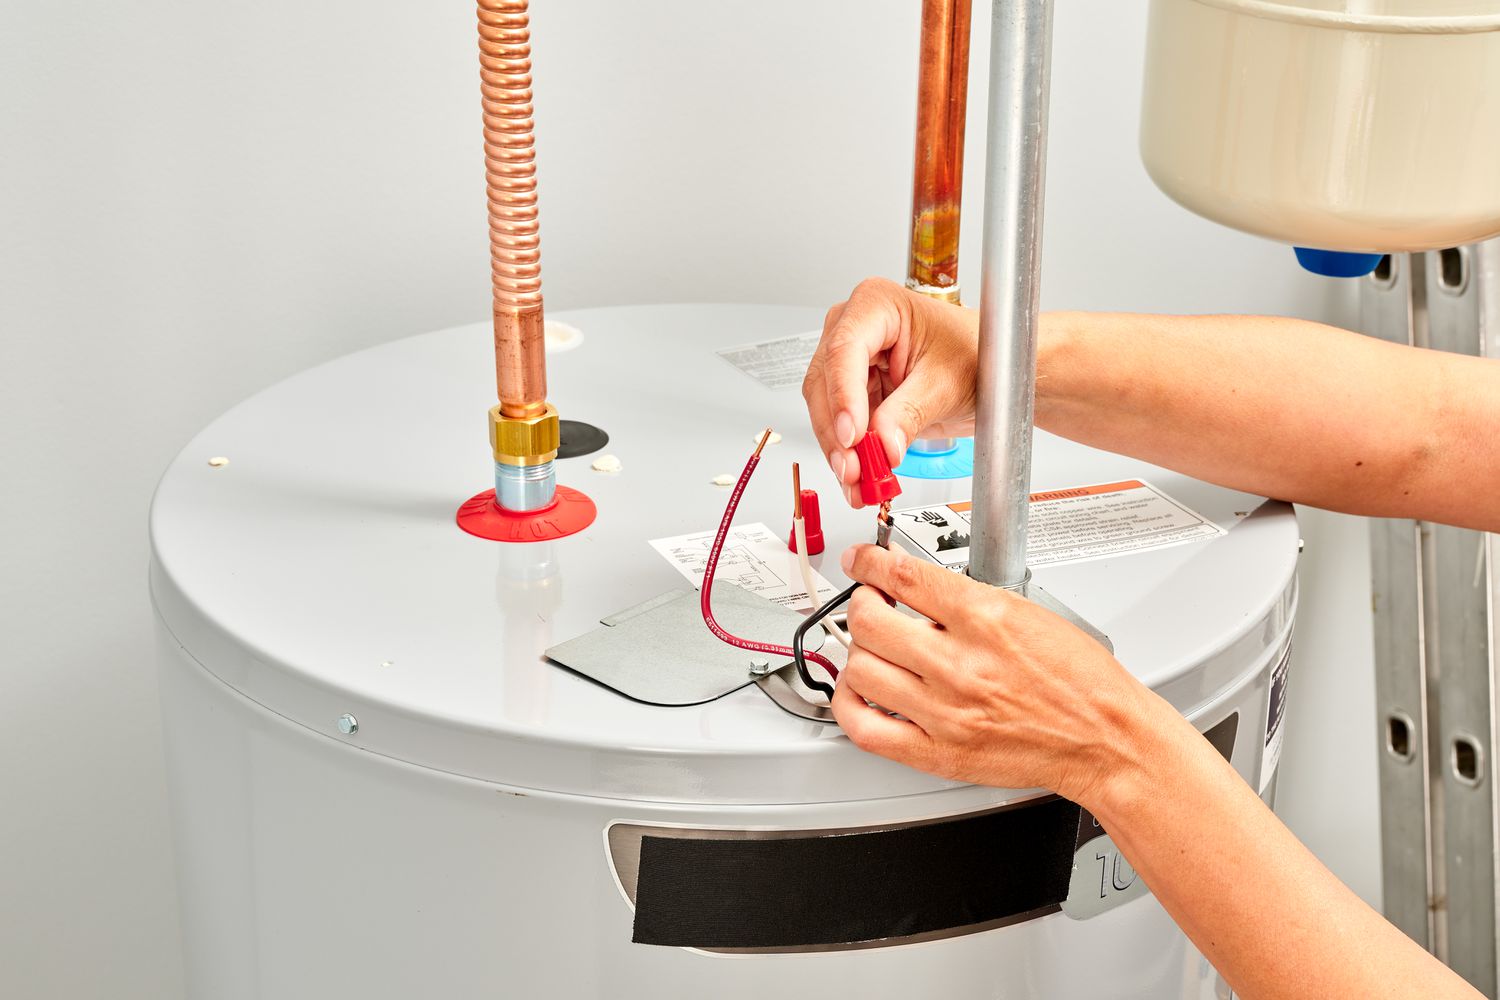 Step-By-Step Guide on Installing a Water Heater?